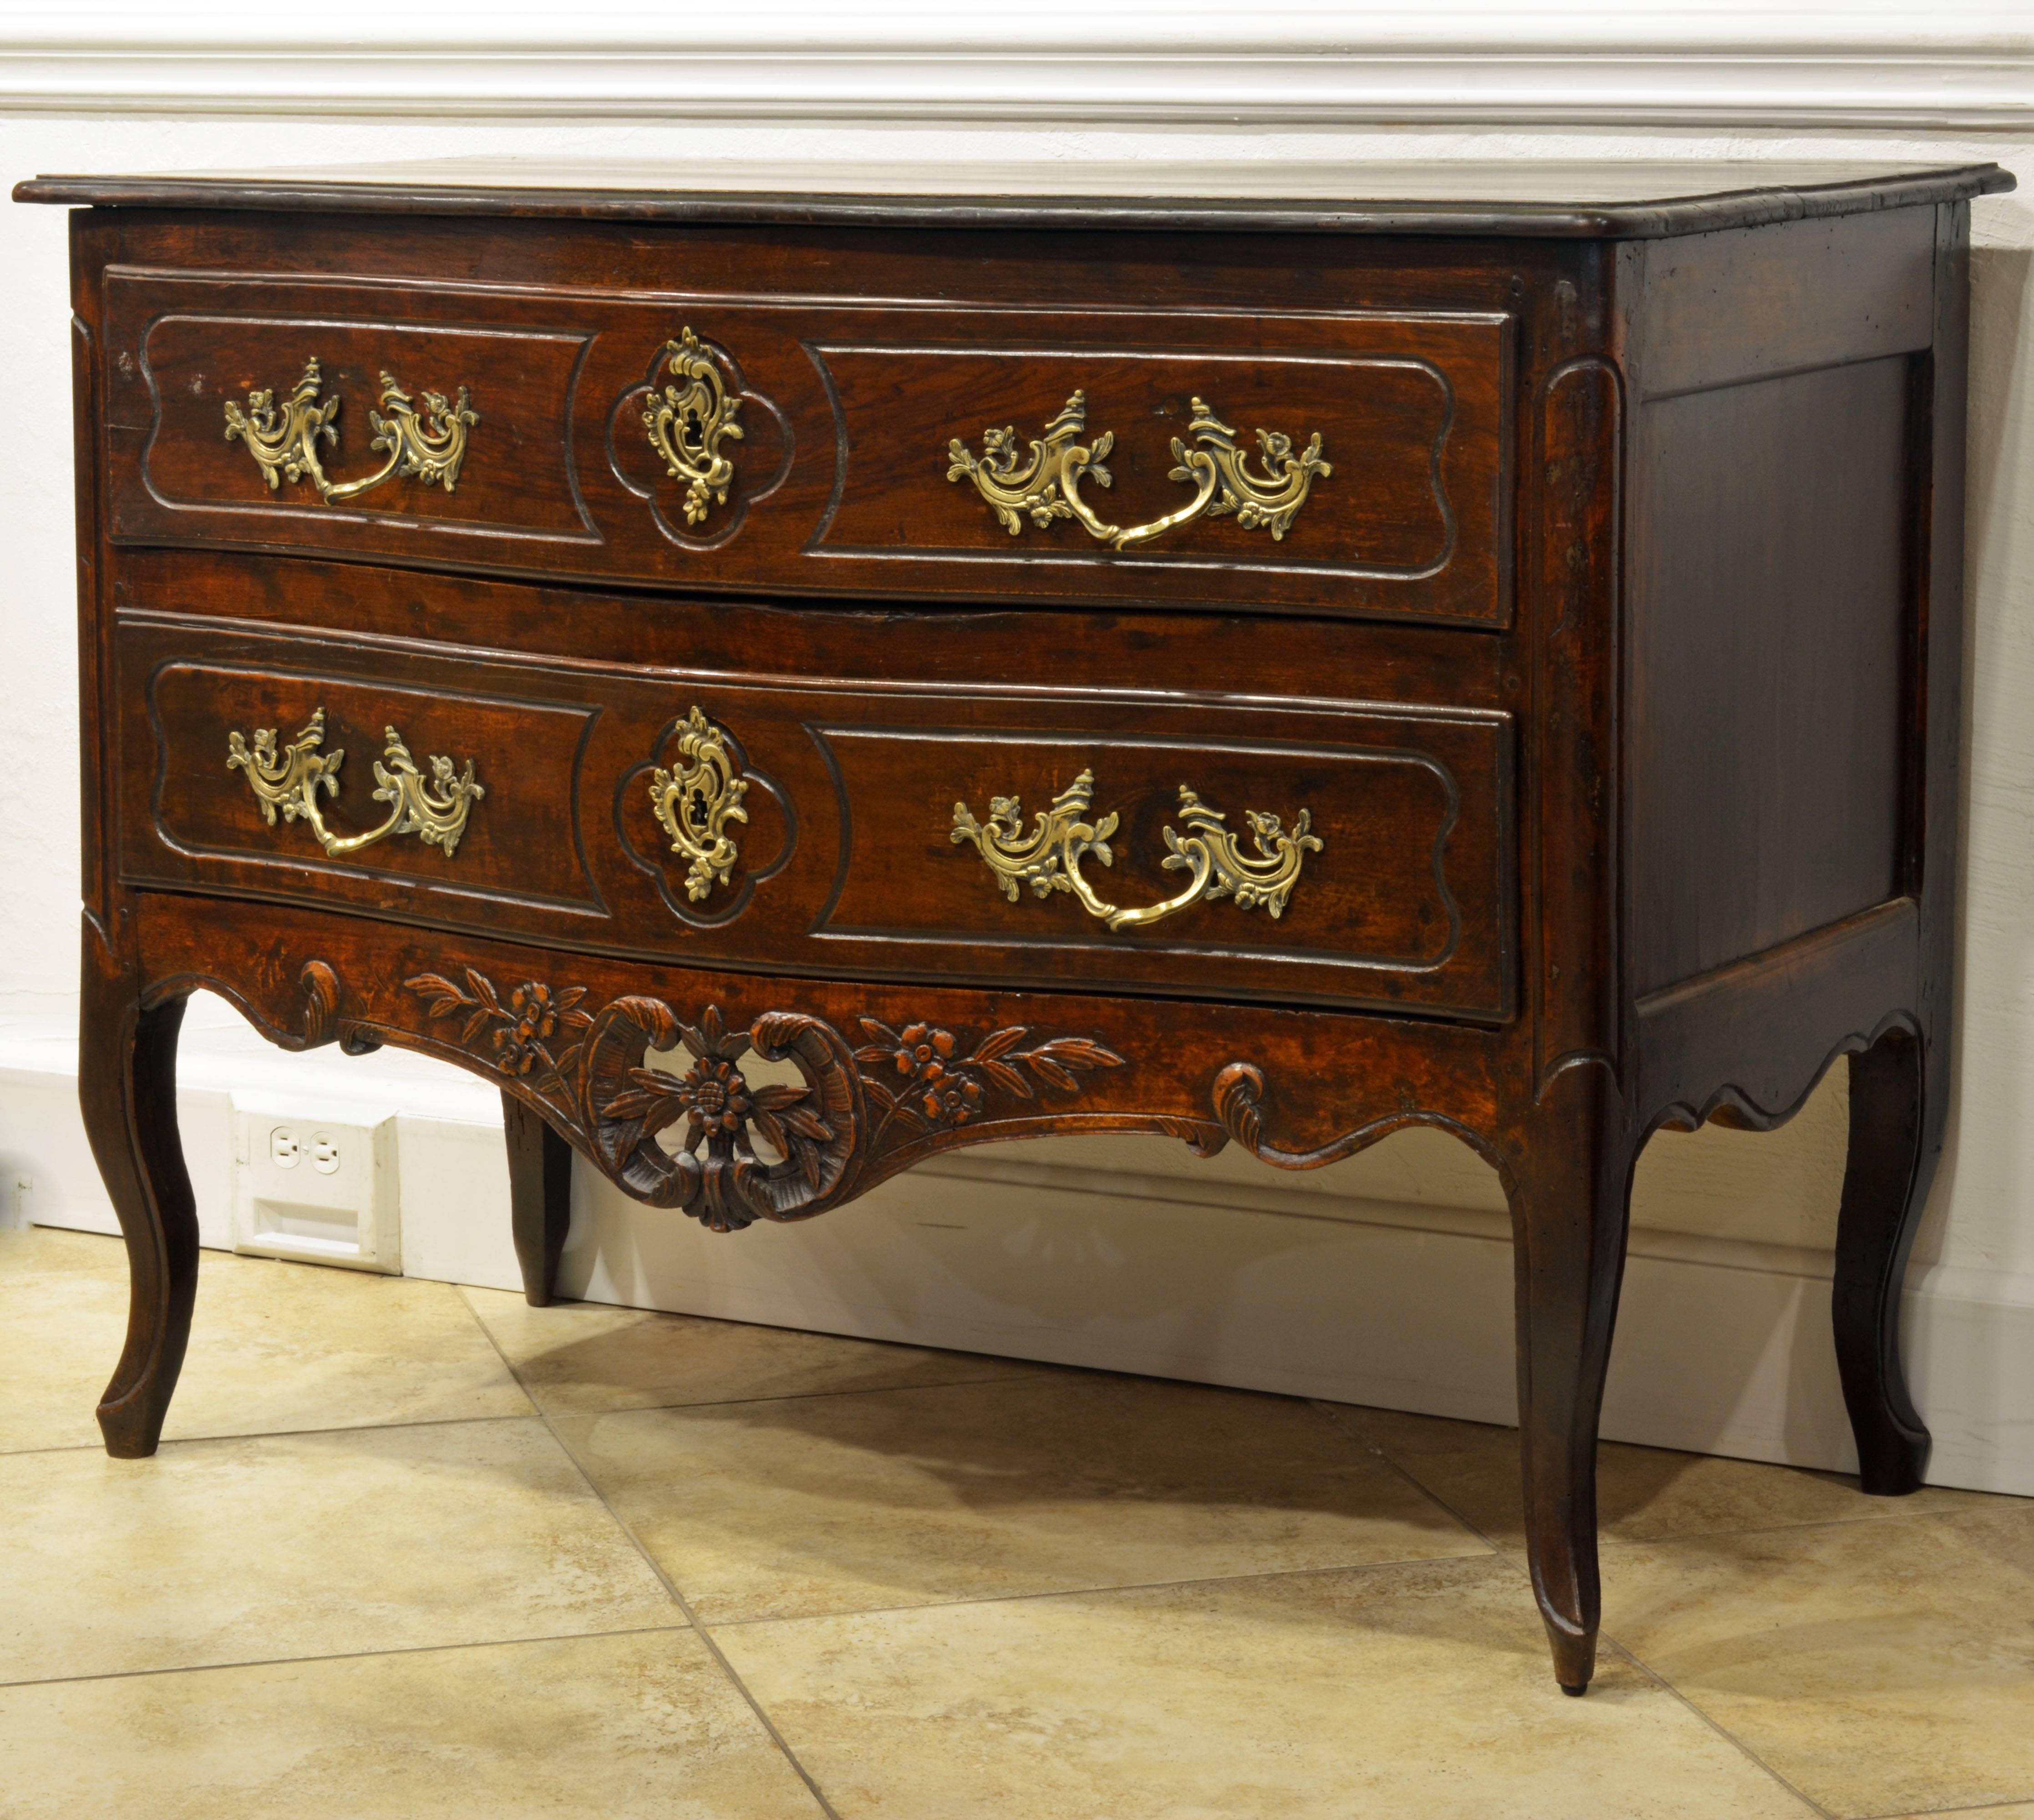 This charming commode features the Italian romantic version of the Louis XV style that was blooming in France at the time. The two delicately profiled serpentine drawers, mounted with typical Rococo gilt bronze hardware, above an open work carved